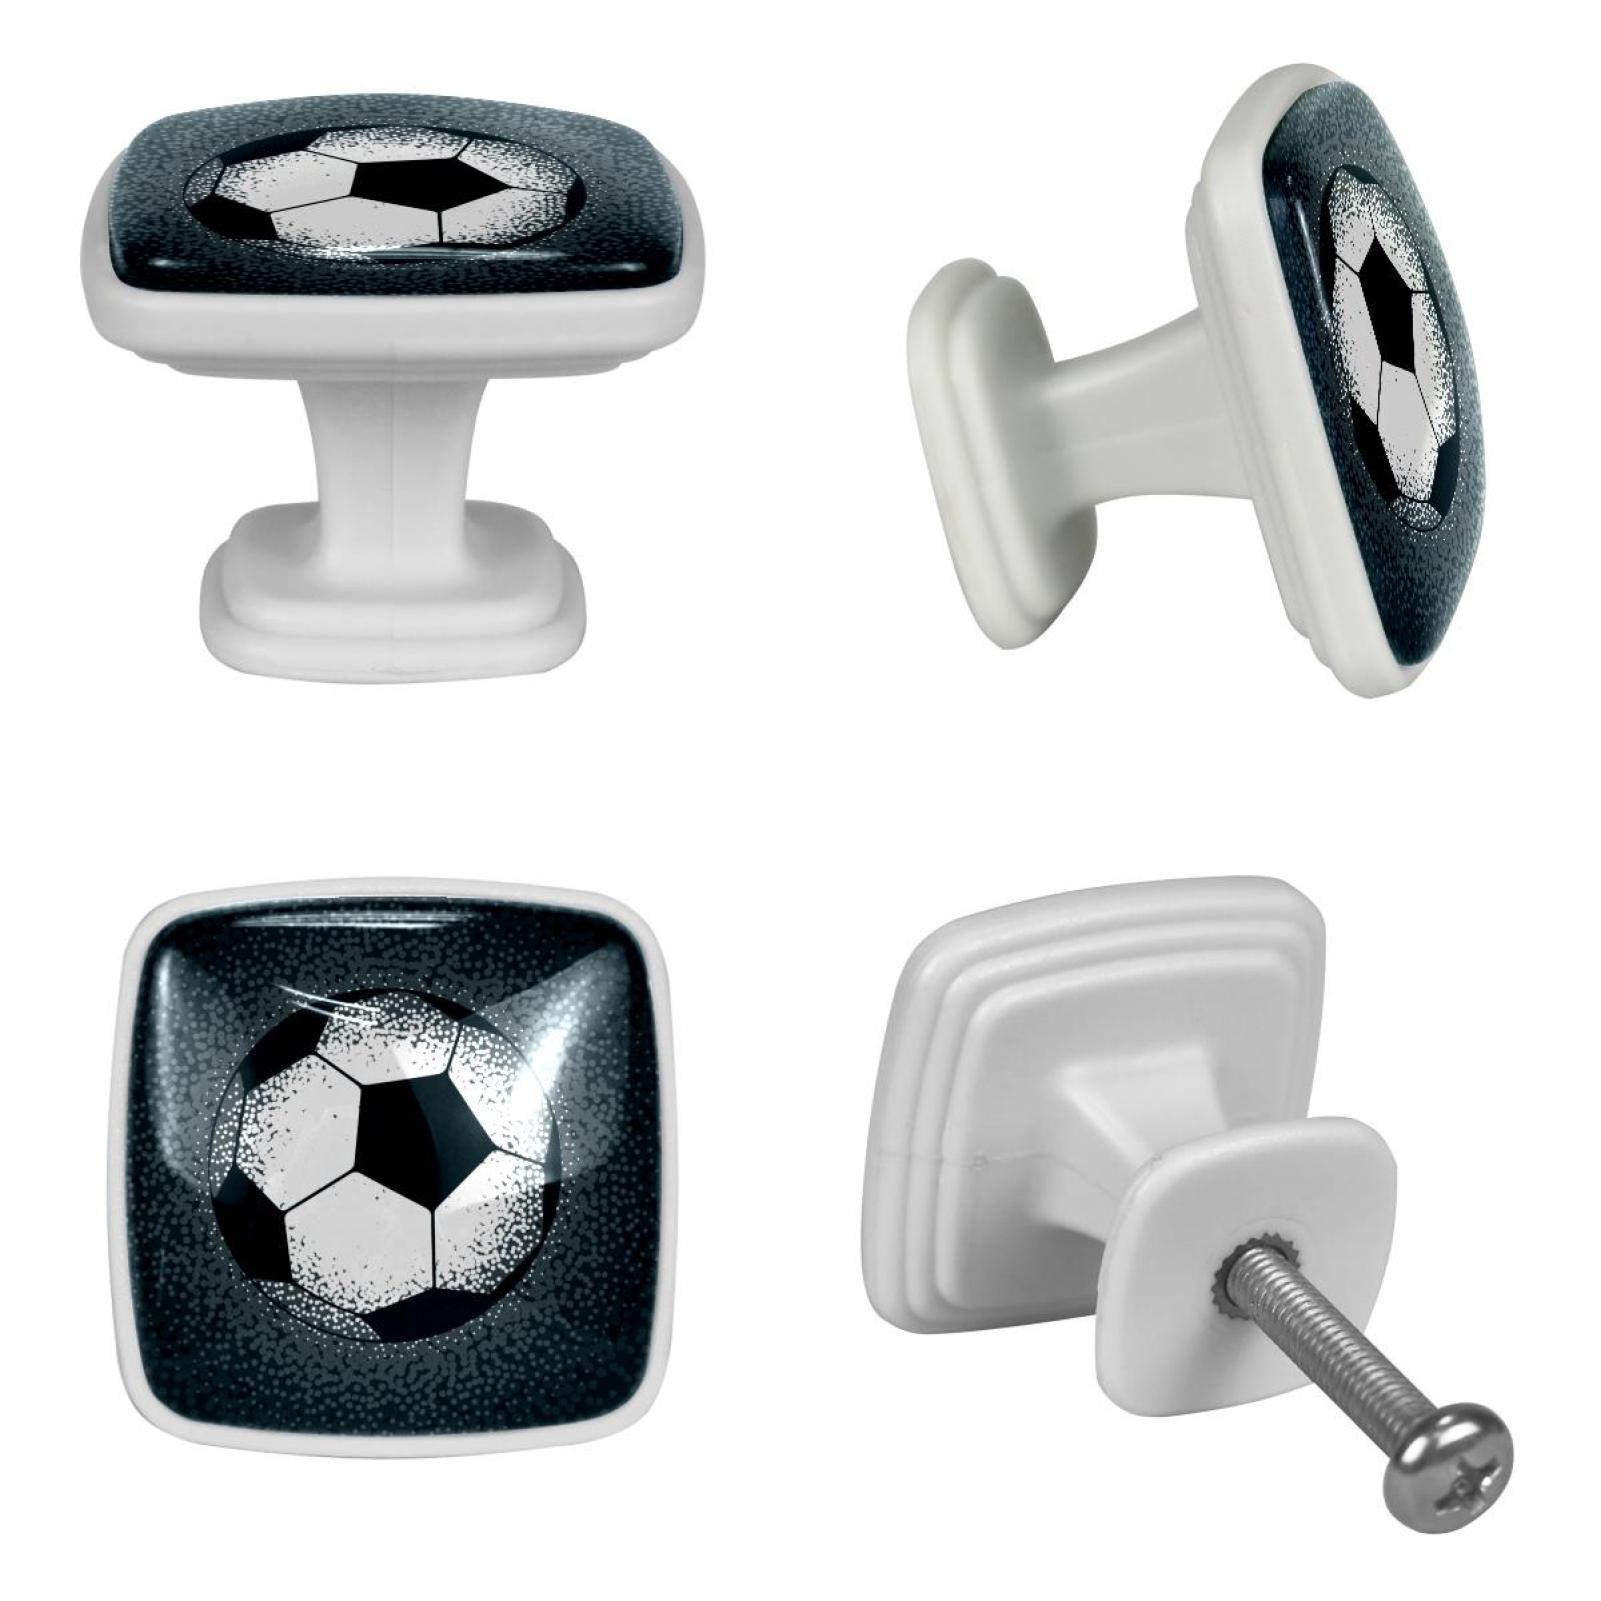 Ownta 4 Pcs Square Cabinet Handle Cupboard Fluorescence Knob Glowing in the Dark Drawer Pulls Handle Drawer Knobs with Screws Furniture Decor Soccer Retro Ball Football - image 4 of 5